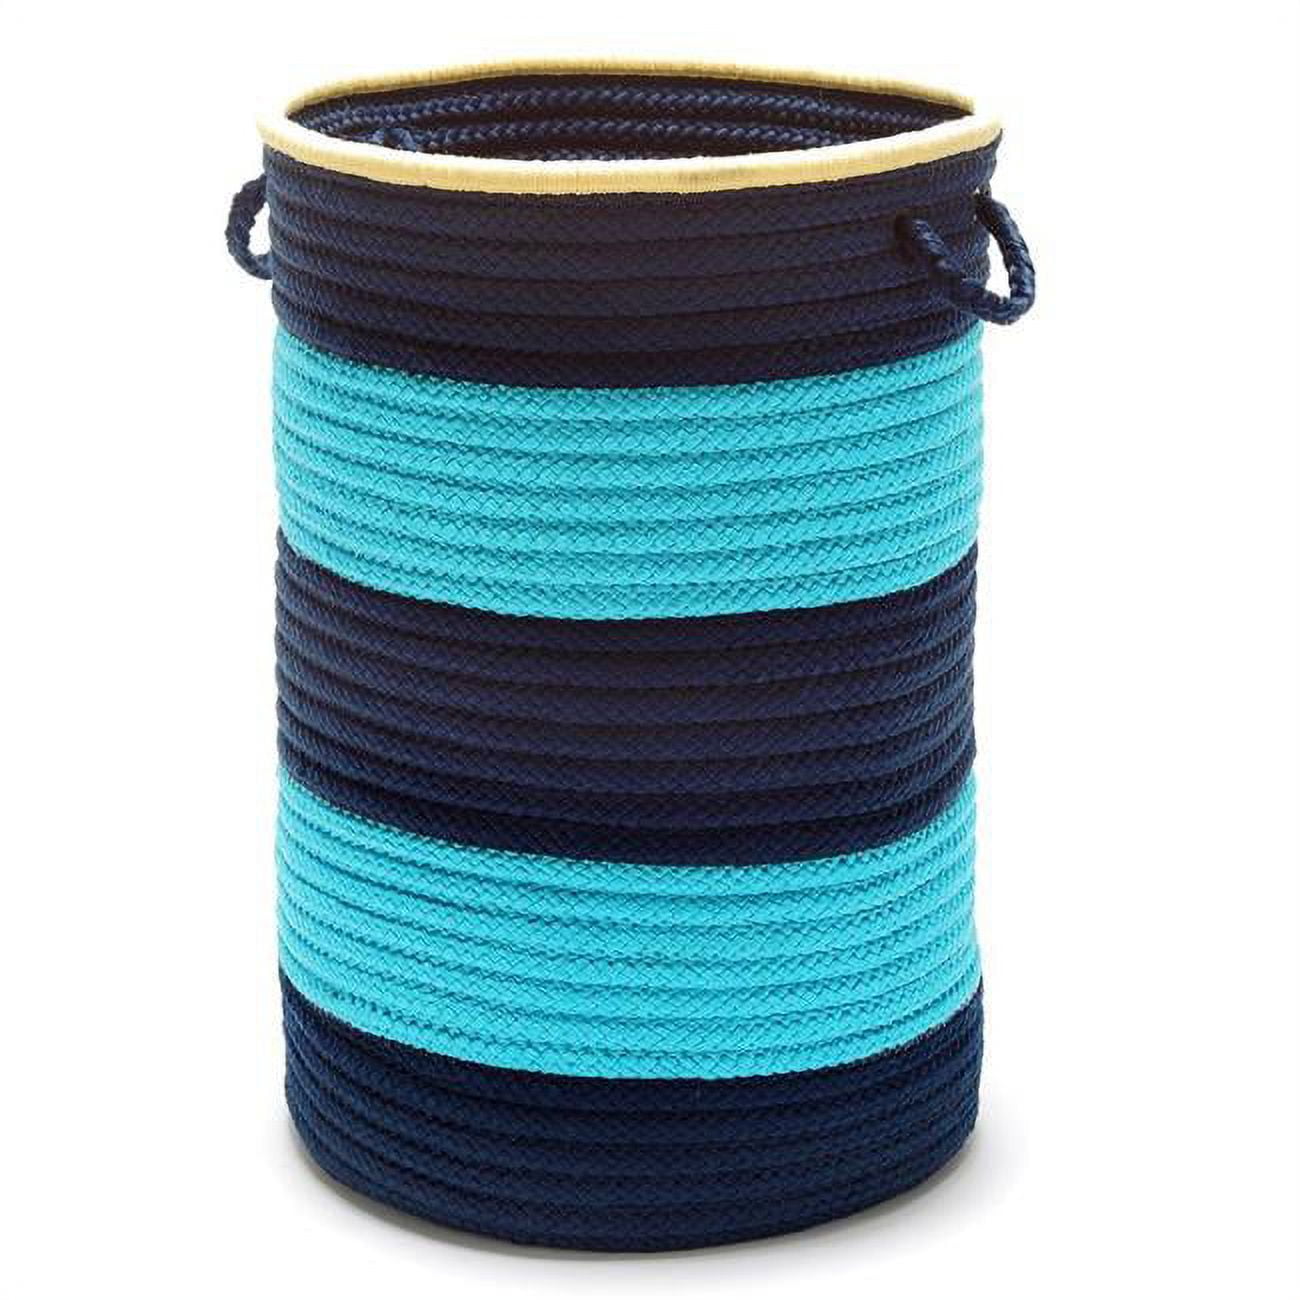 Lo51a016x024 Color Block Hamper, Turquoise & Navy